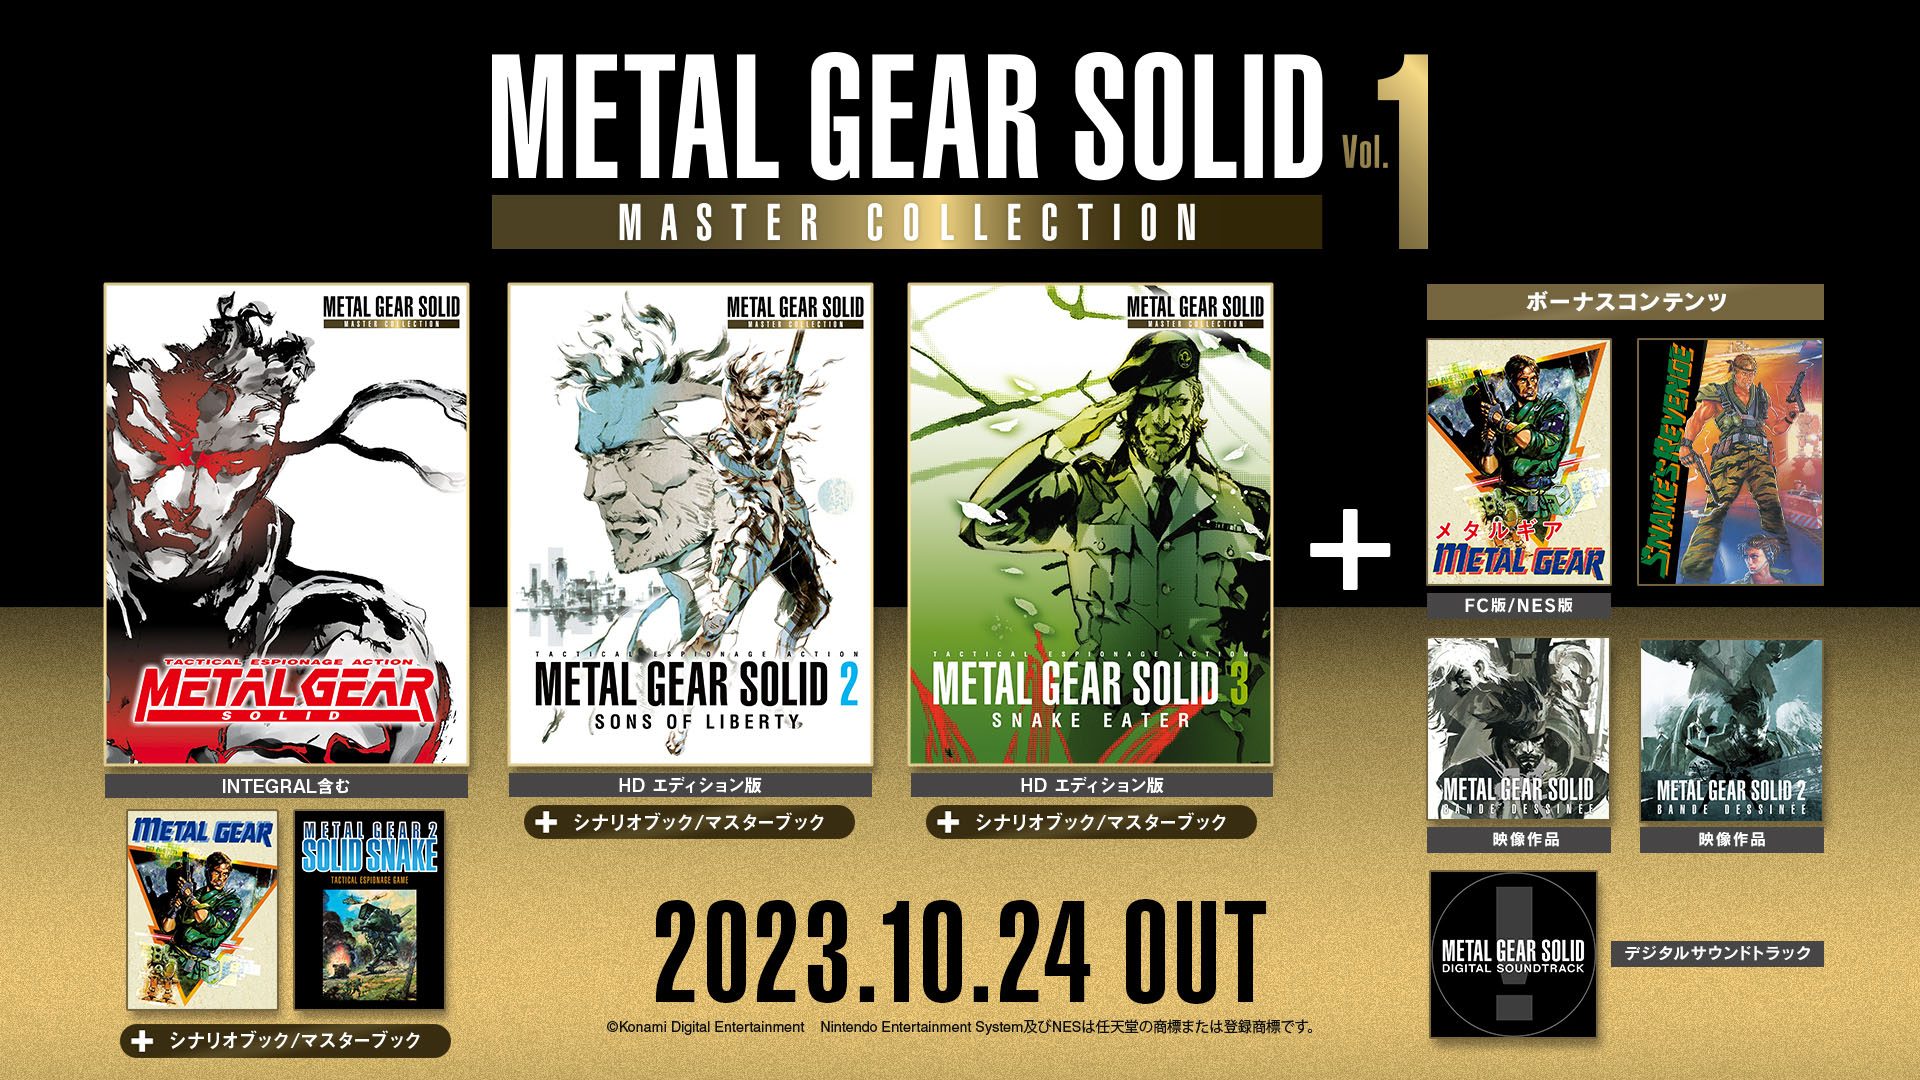 METAL GEAR SOLID: MASTER COLLECTION Vol.1』本日発売！ シリーズ7 ...